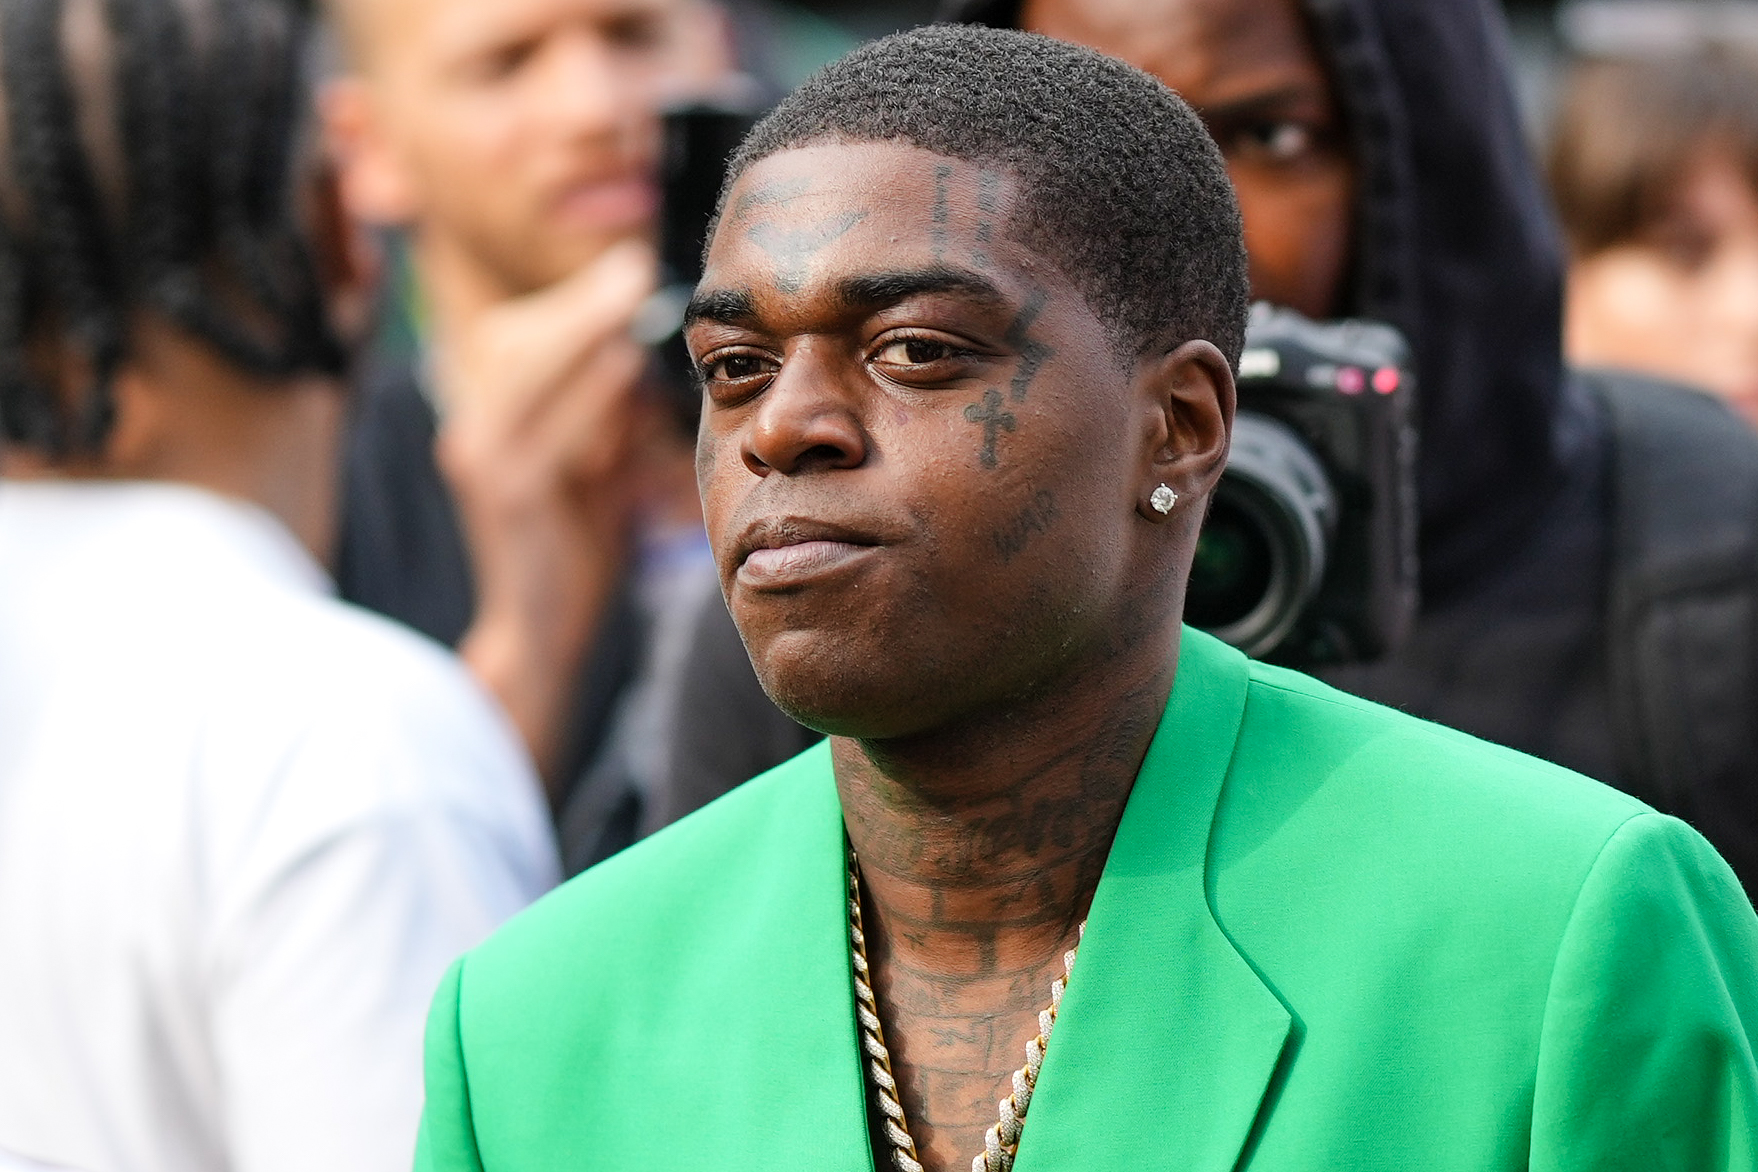 Kodak Black Hit With Lawsuit From Limo Company Over Alleged $600K Debt